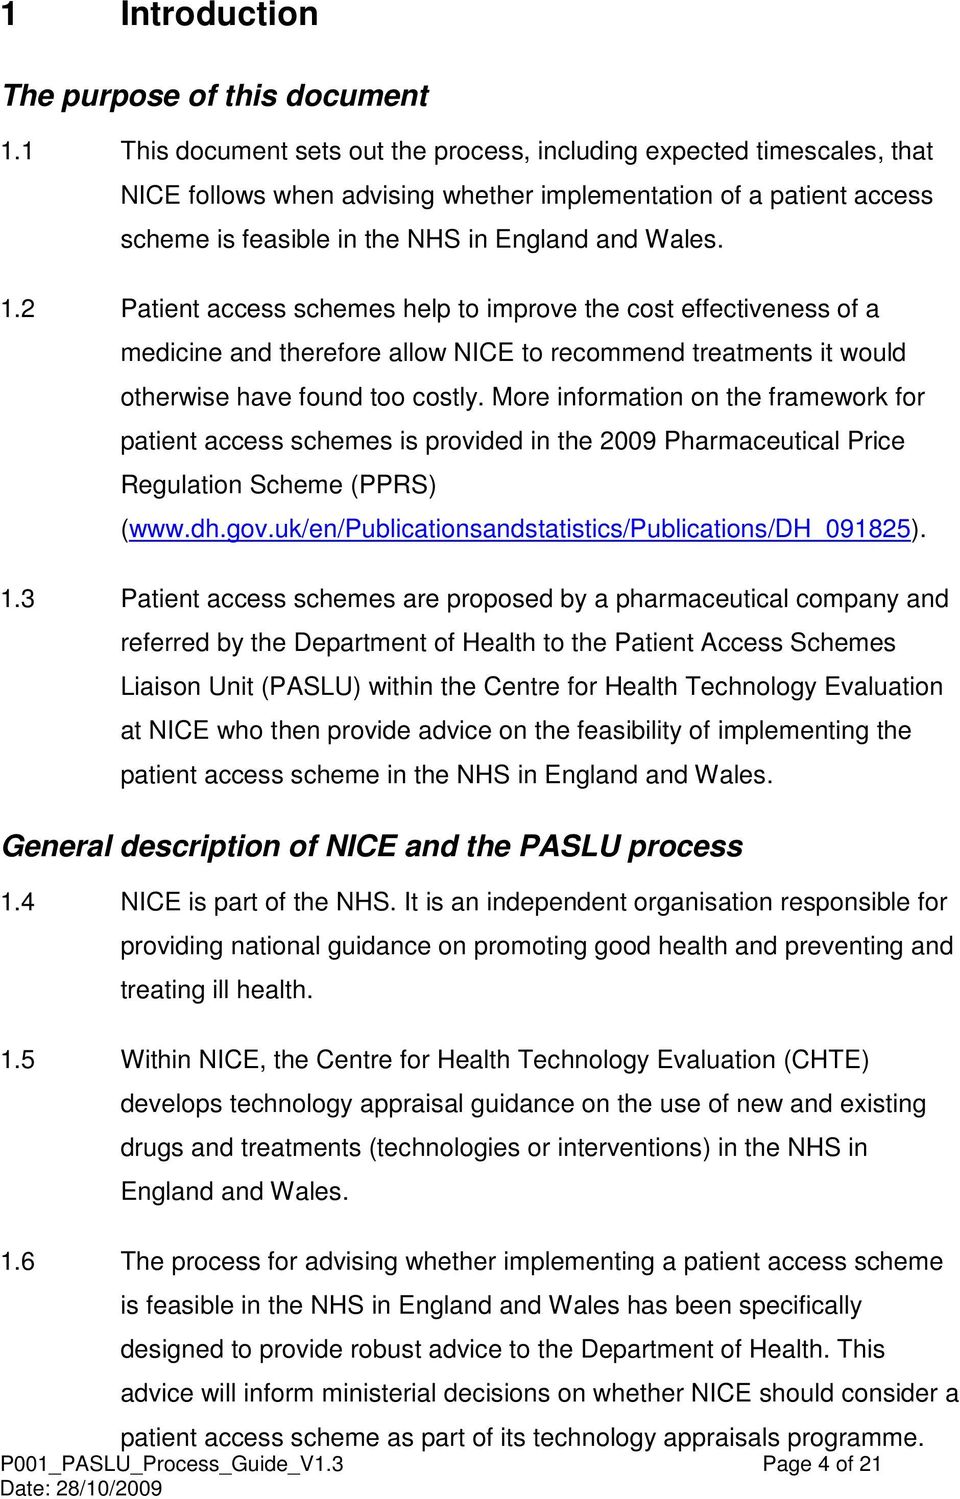 2 Patient access schemes help to improve the cost effectiveness of a medicine and therefore allow NICE to recommend treatments it would otherwise have found too costly.